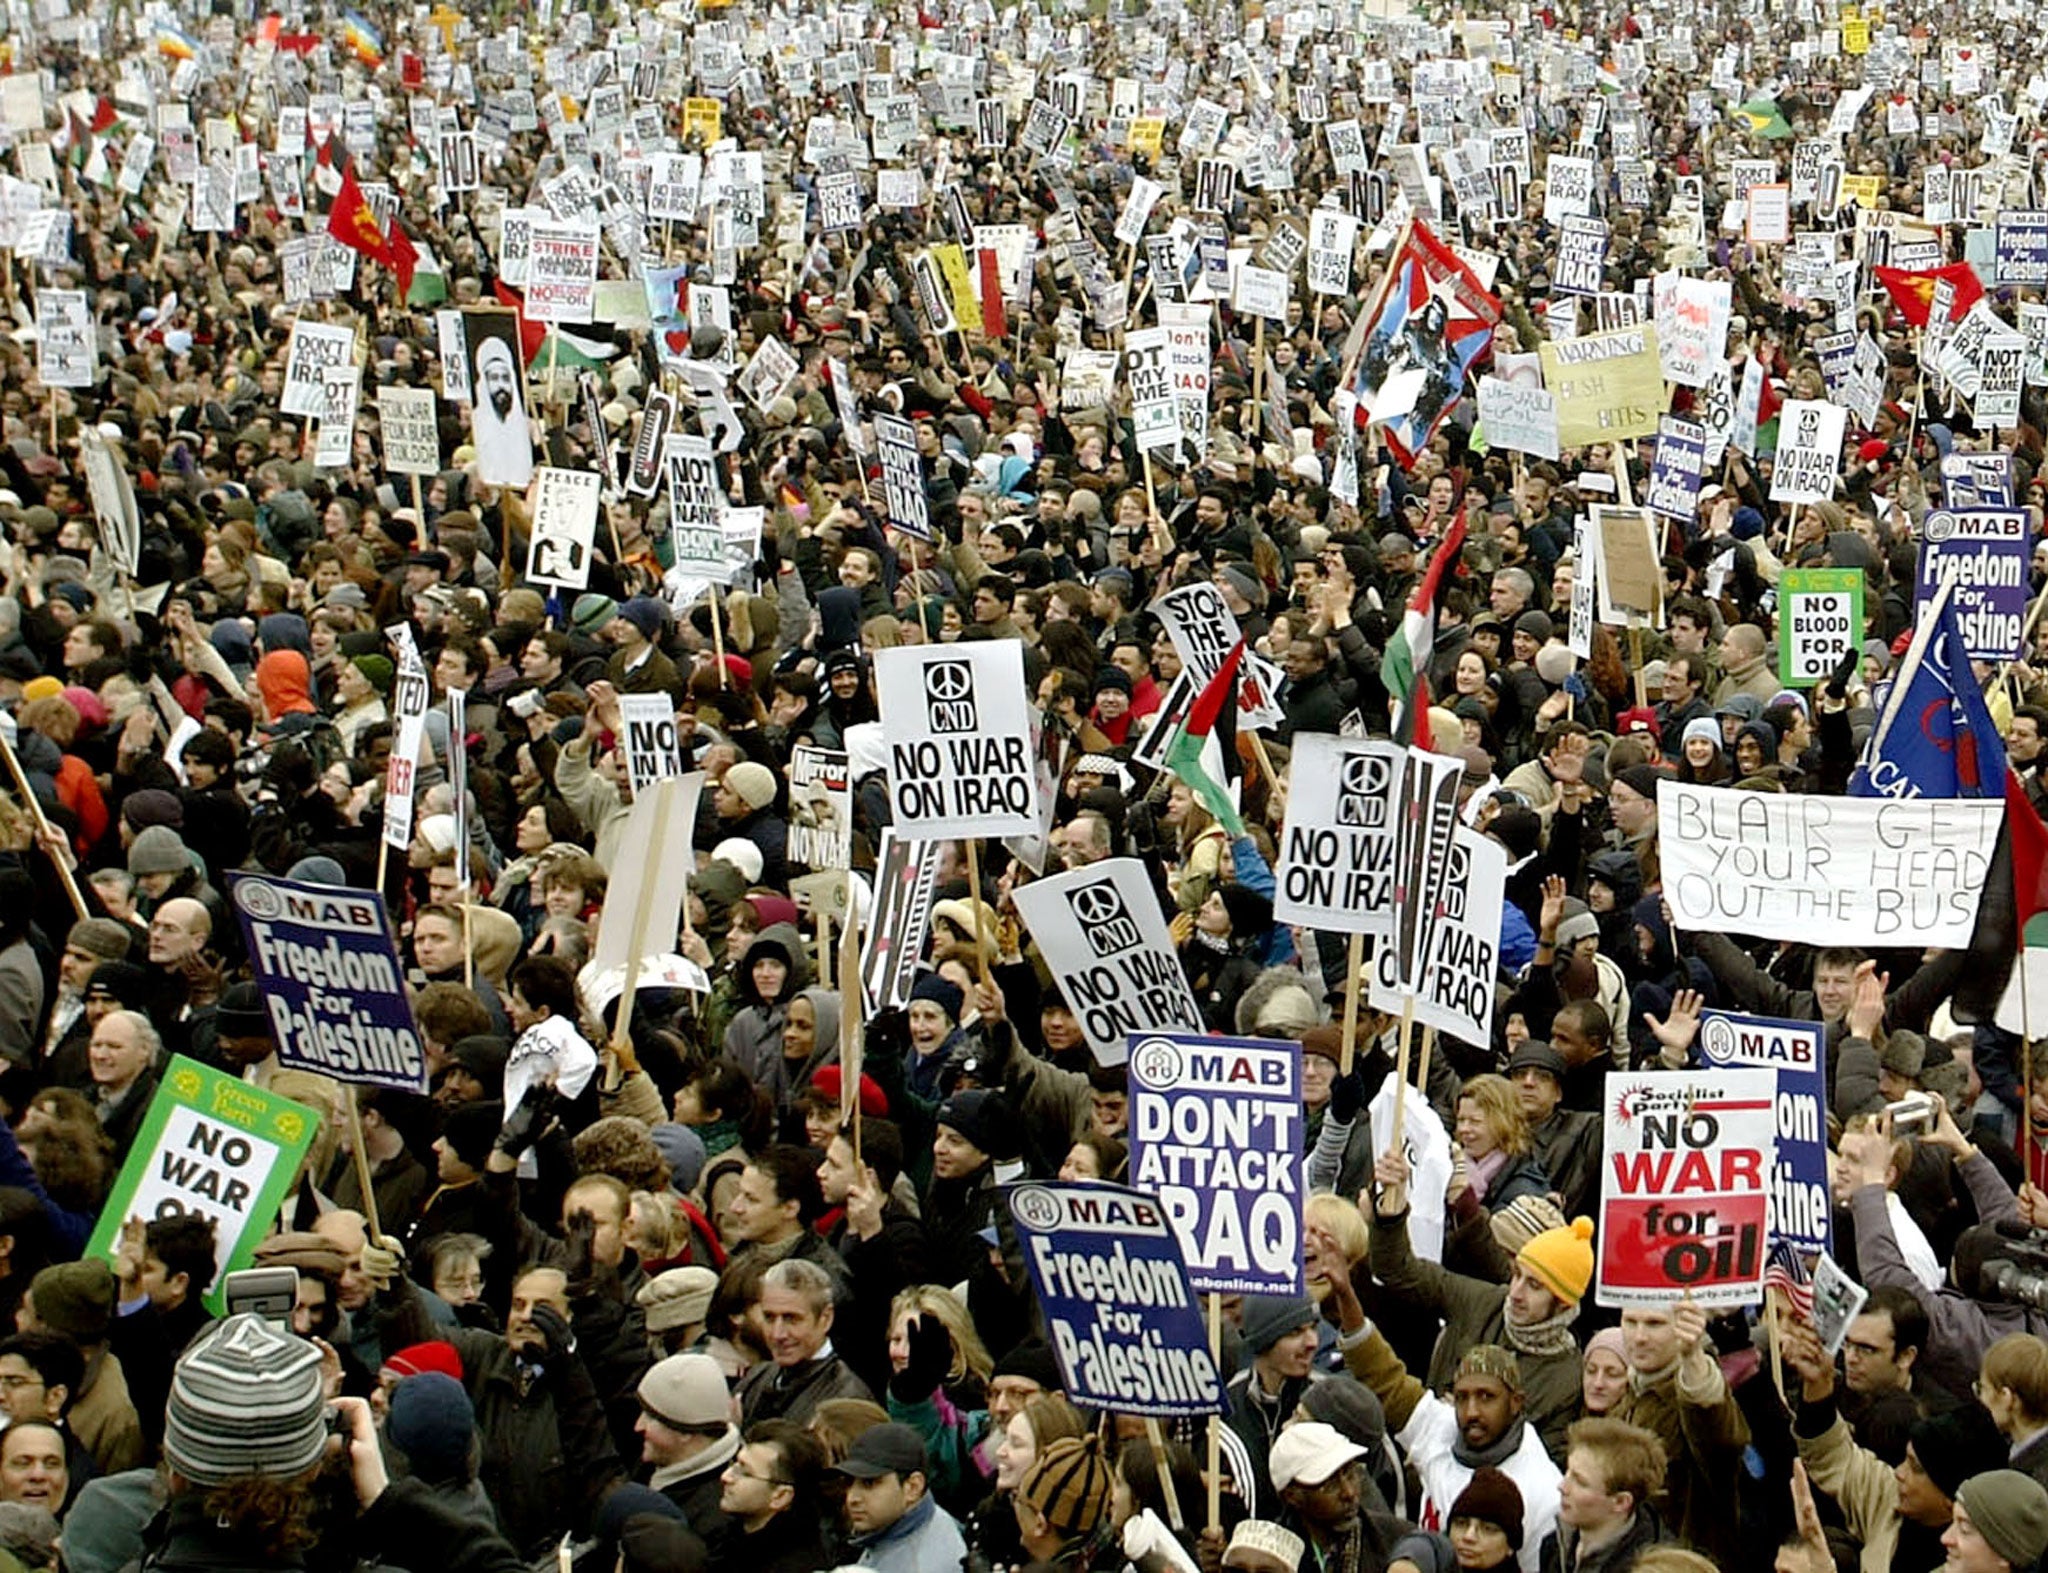 ‘People’s Assembly’ hope to unite those angered by the Government’s economic decisions and be bigger than the anti-Iraq war demo in 2003 (pictured)